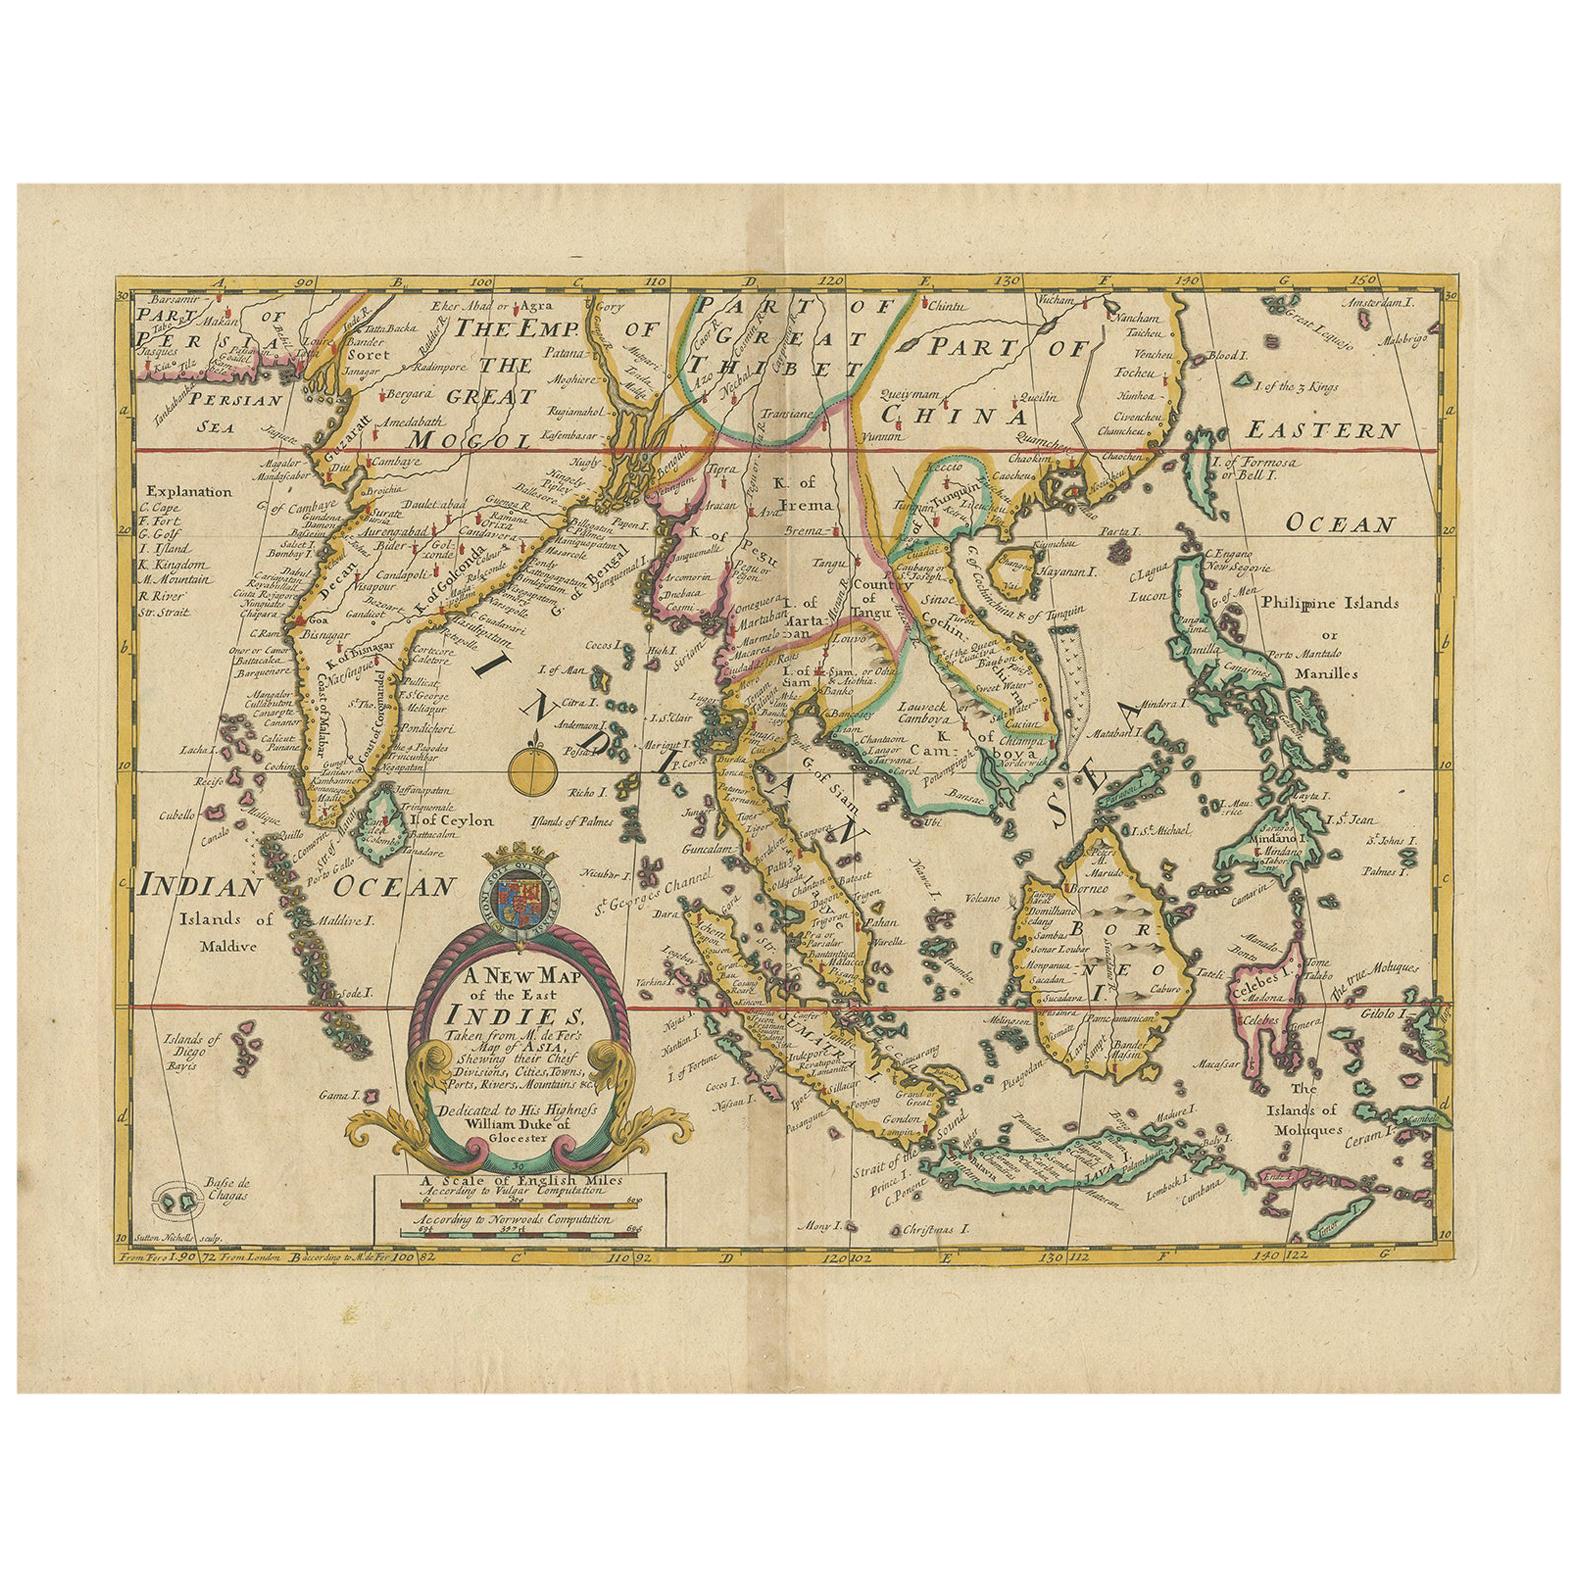 Antique Map of the East Indies by Wells, 1712